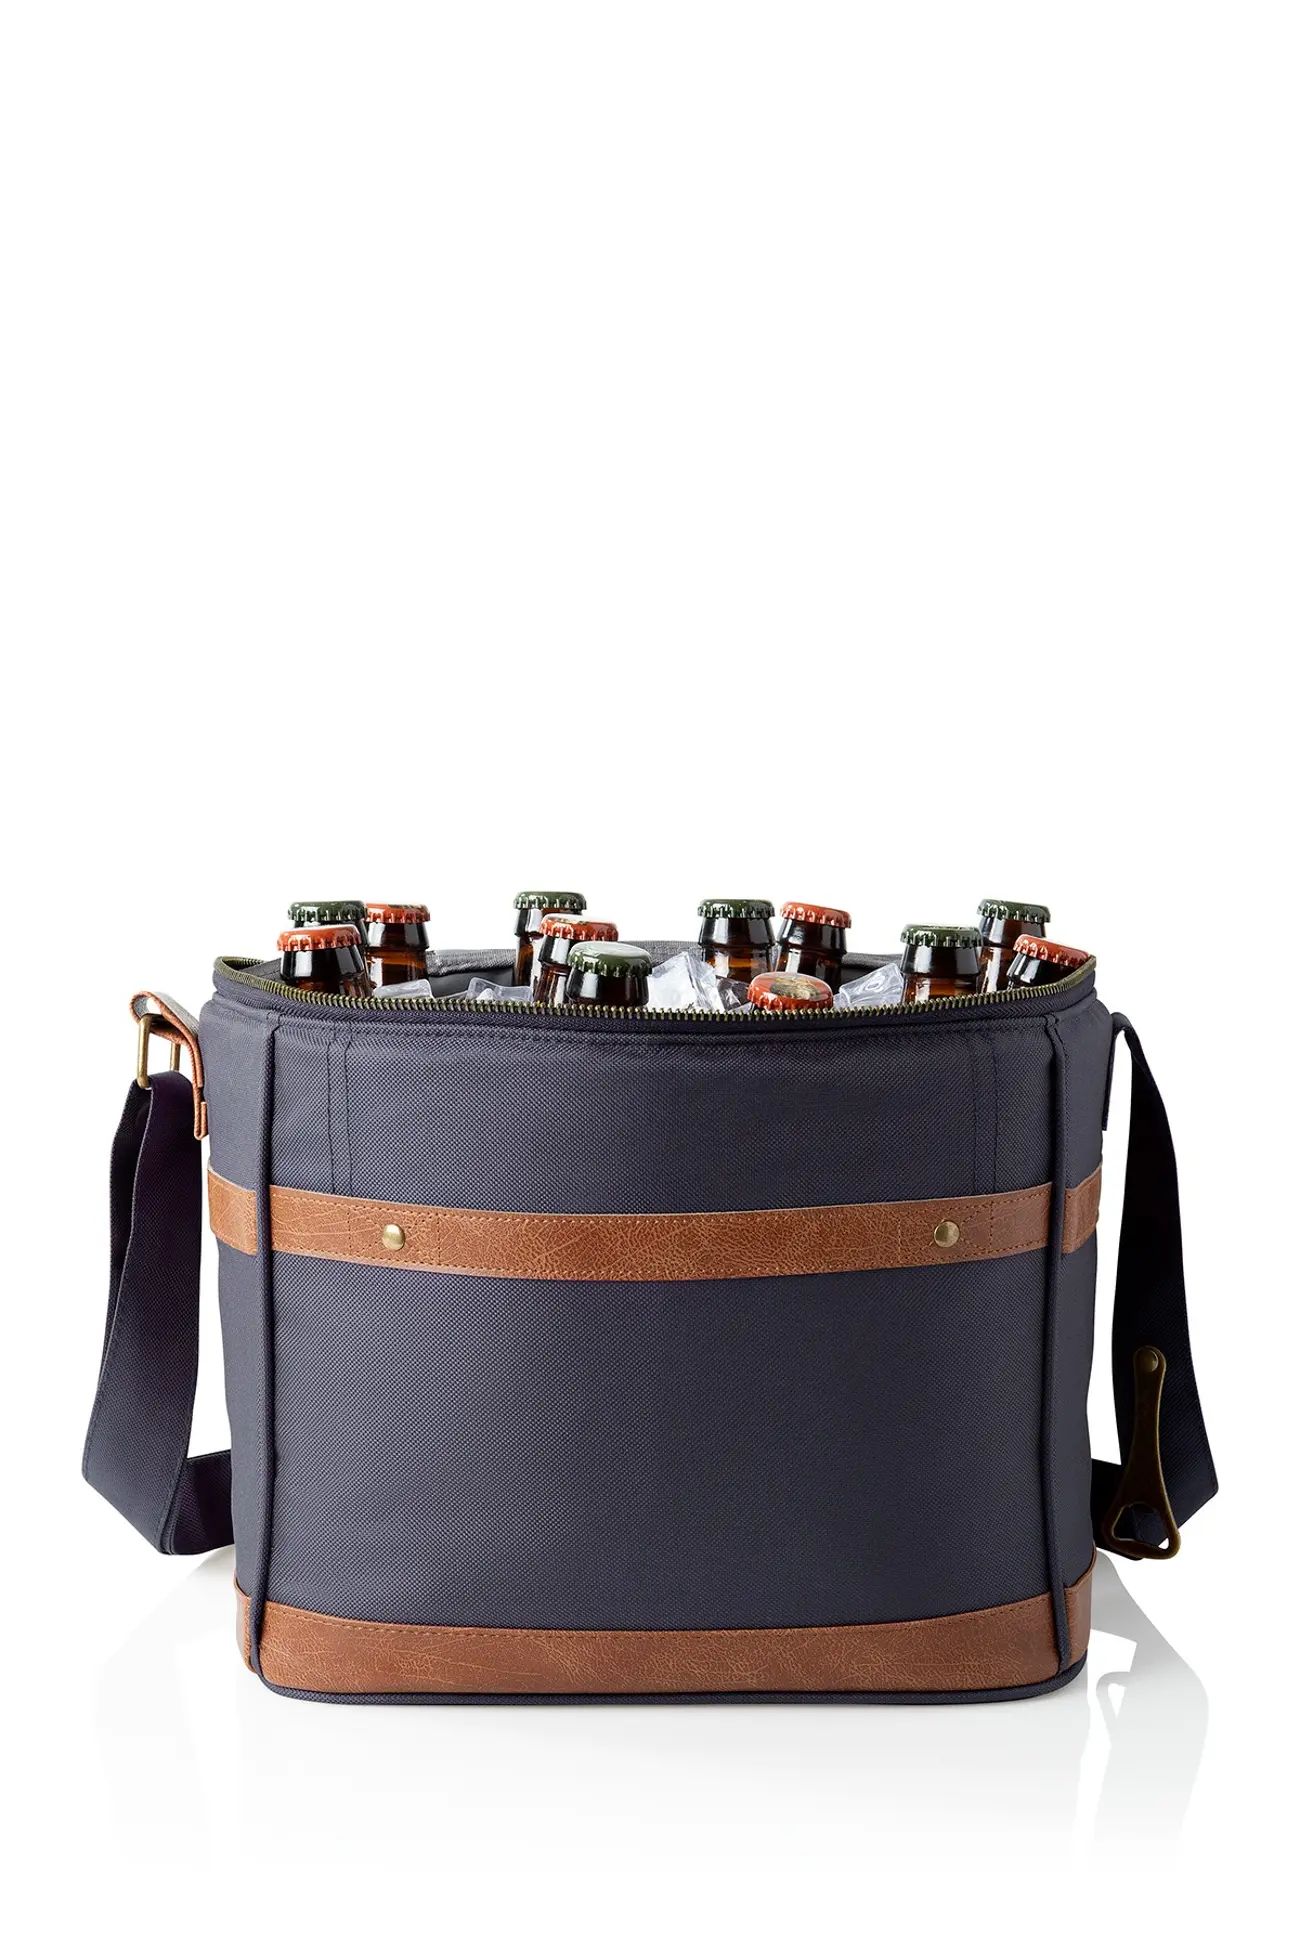 Cathy's Concepts | Navy Monogrammed 12-Bottle Beer Cooler Bag - Multiple Letters Available | Nord... | Nordstrom Rack